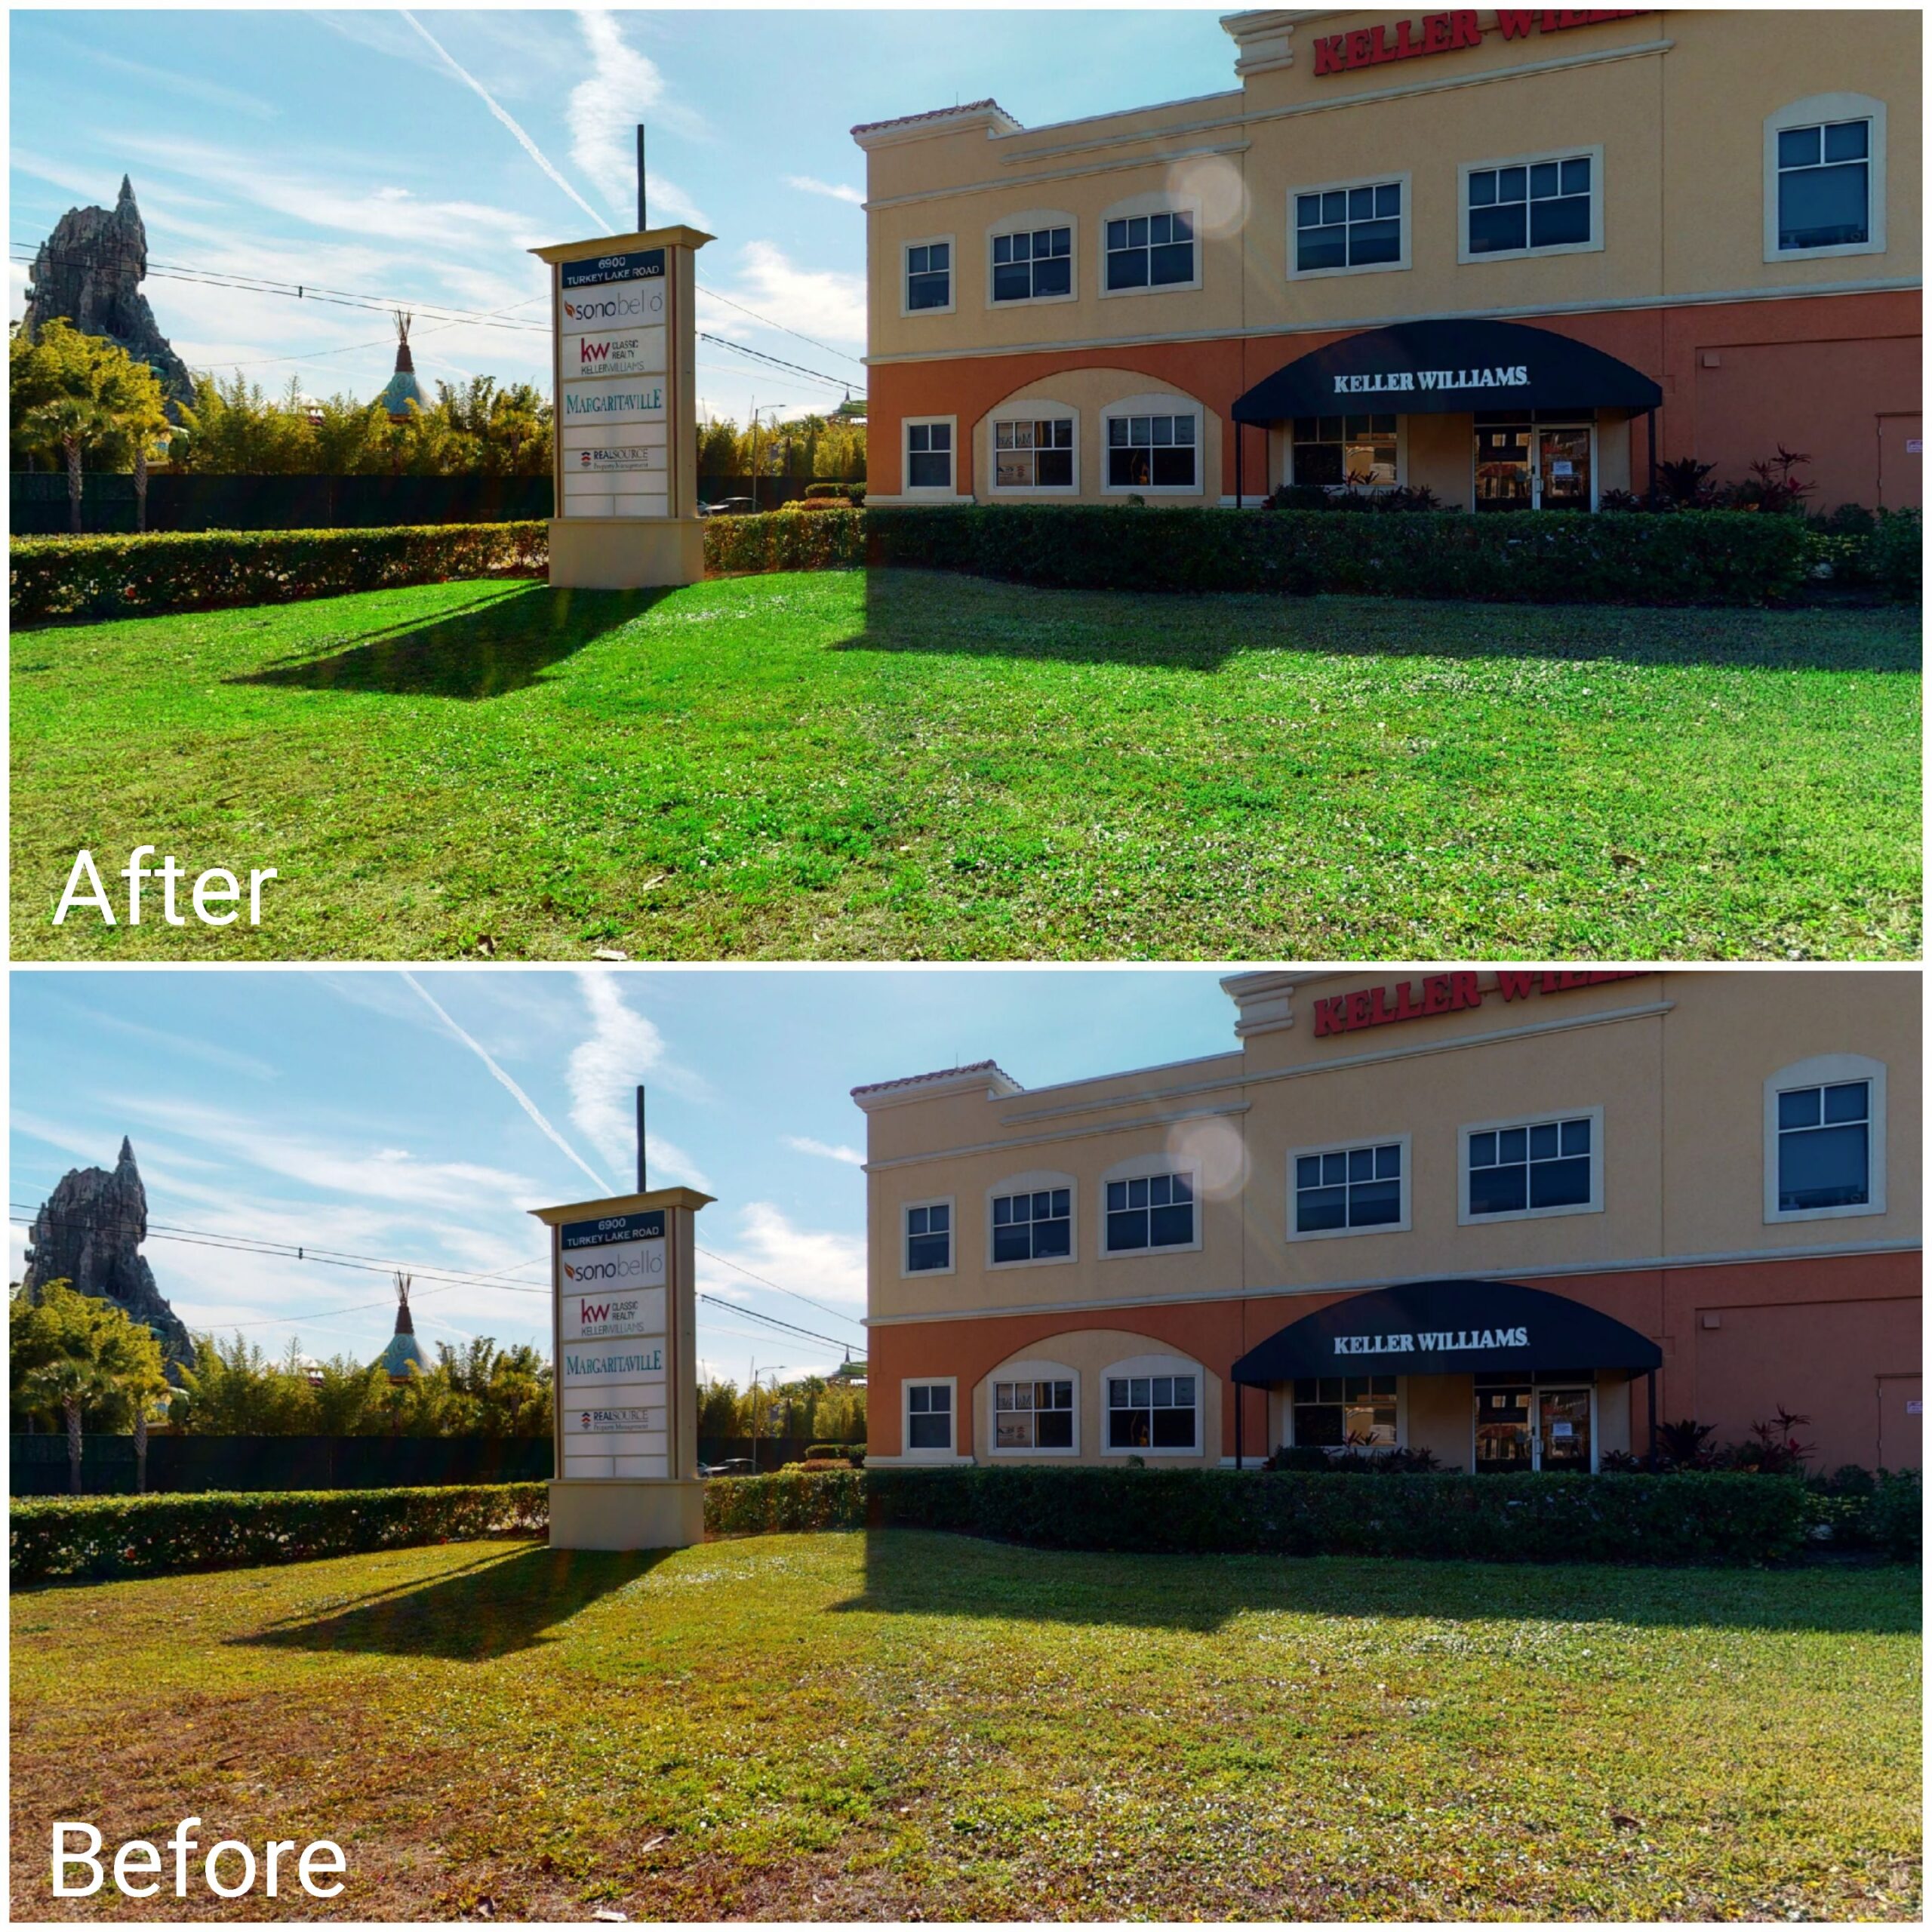 Before and after pictures of the Keller Williams building